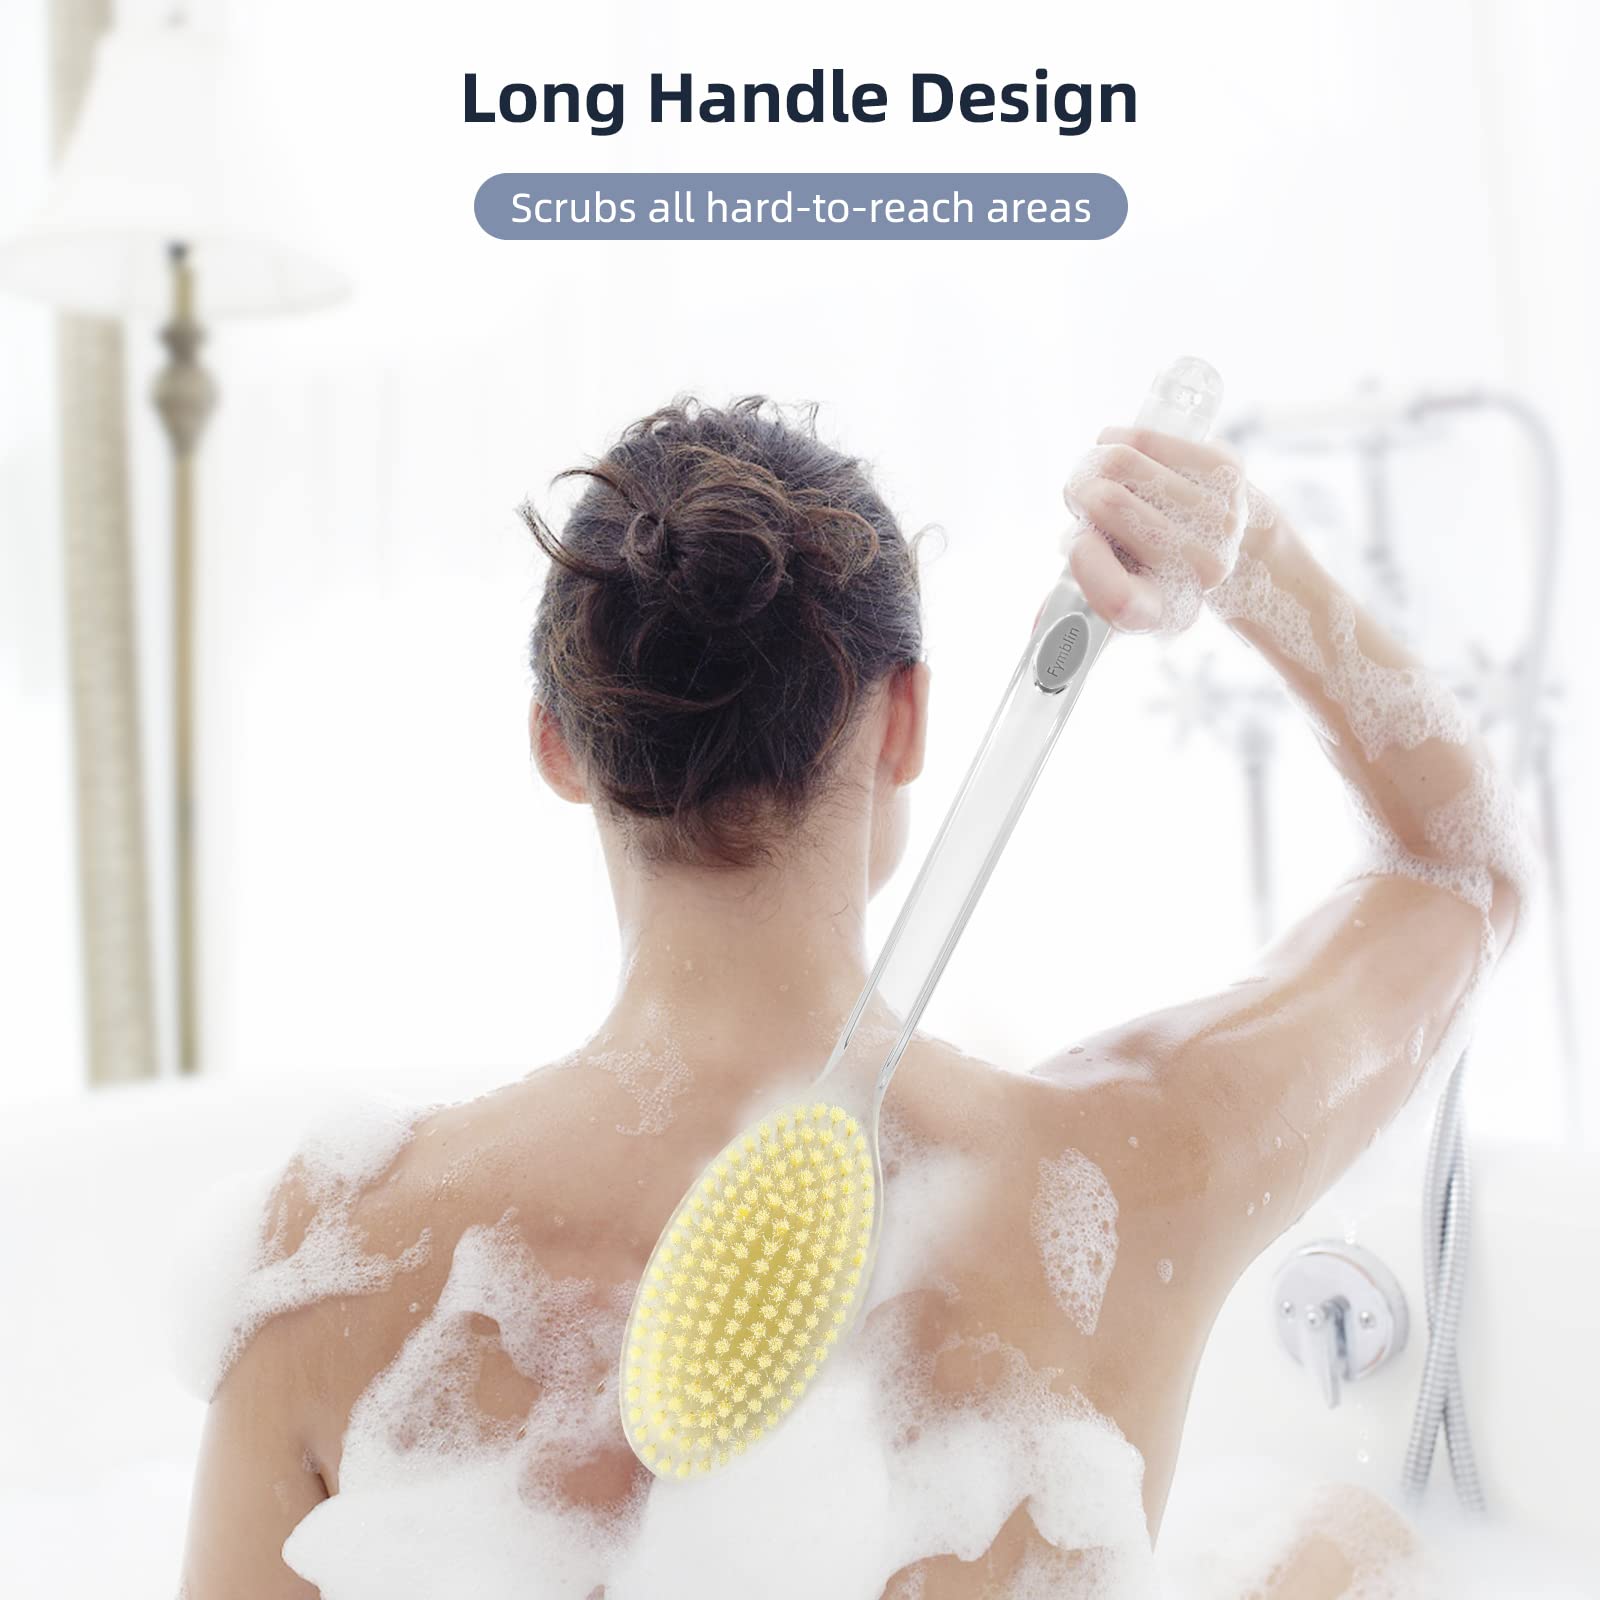 Fymblin Back Scrubber Long Handle for Shower,Back Brush Anti Slip with Stiff and Soft Bristles,Body Exfoliator for Bath or Dry Brush